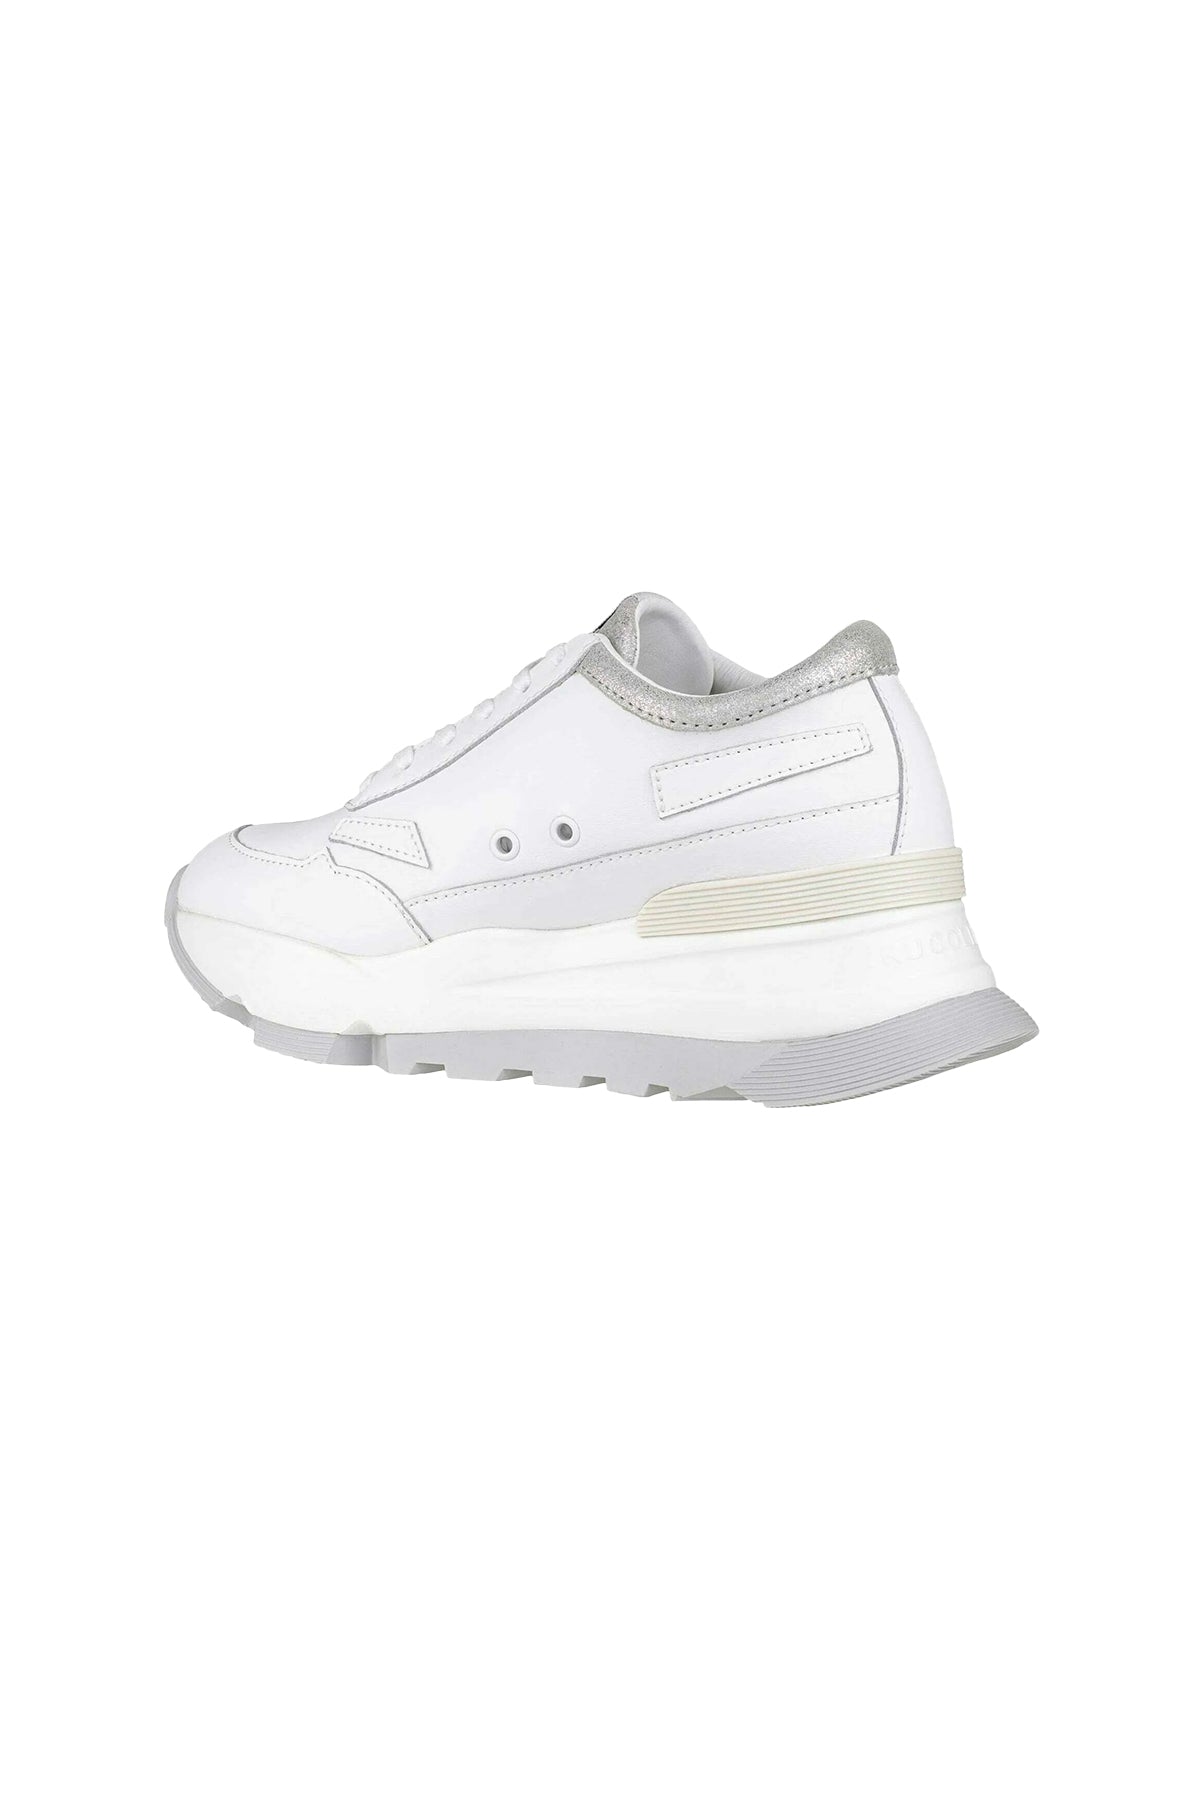 RUCOLINE SNEAKERS Sneaker R-Evolver 4437 Soft Bianco Argento Rucoline